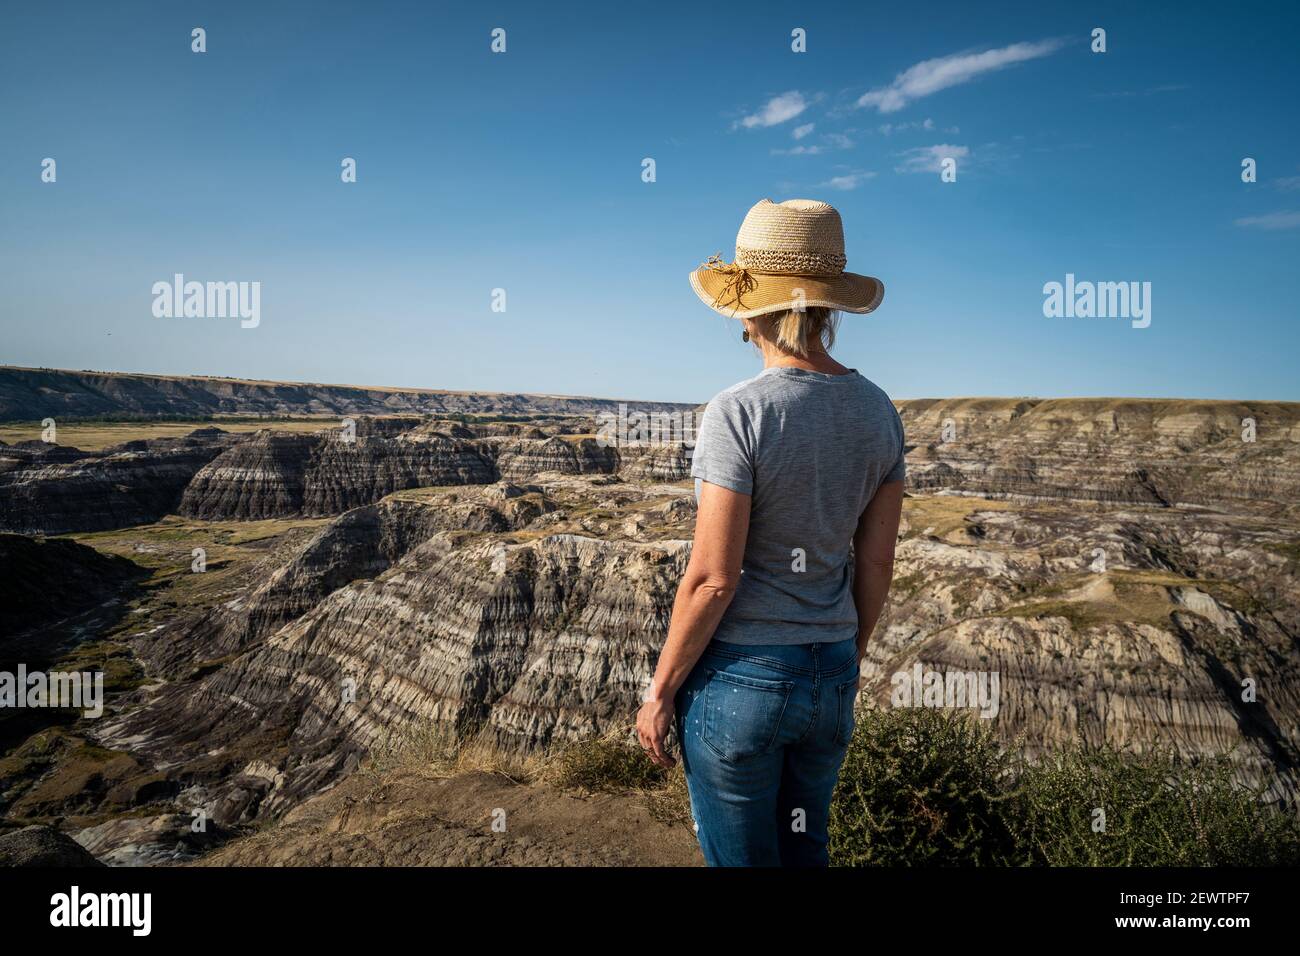 Female traveler looking at view at Horseshoe Canyon near Drumheller in Alberta, Canada. Stock Photo